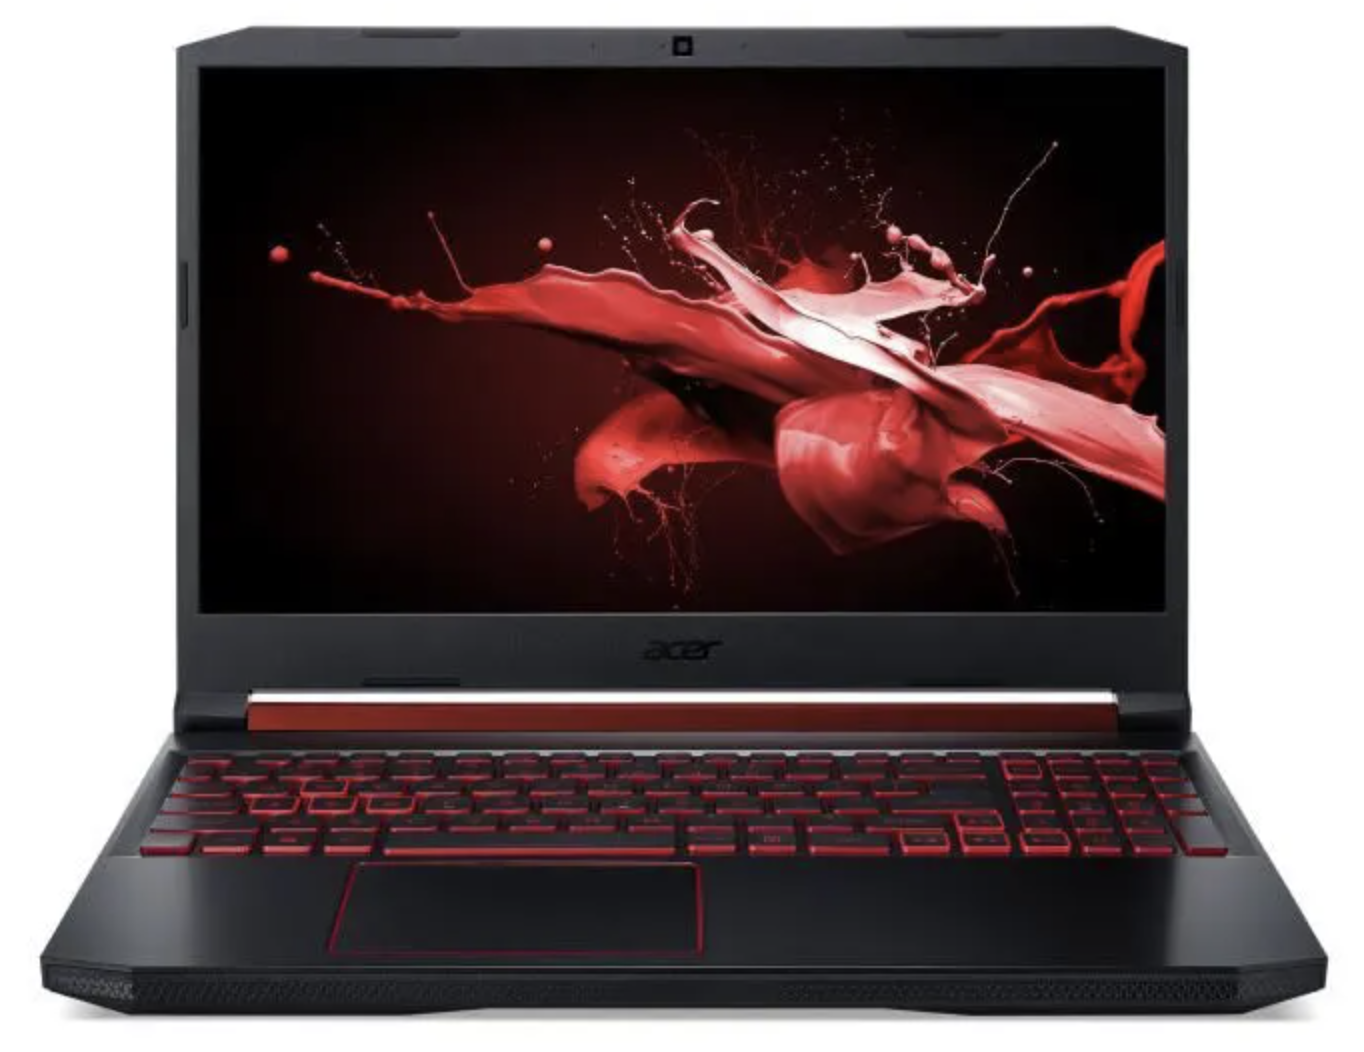 Pc gamer puissant - Cdiscount